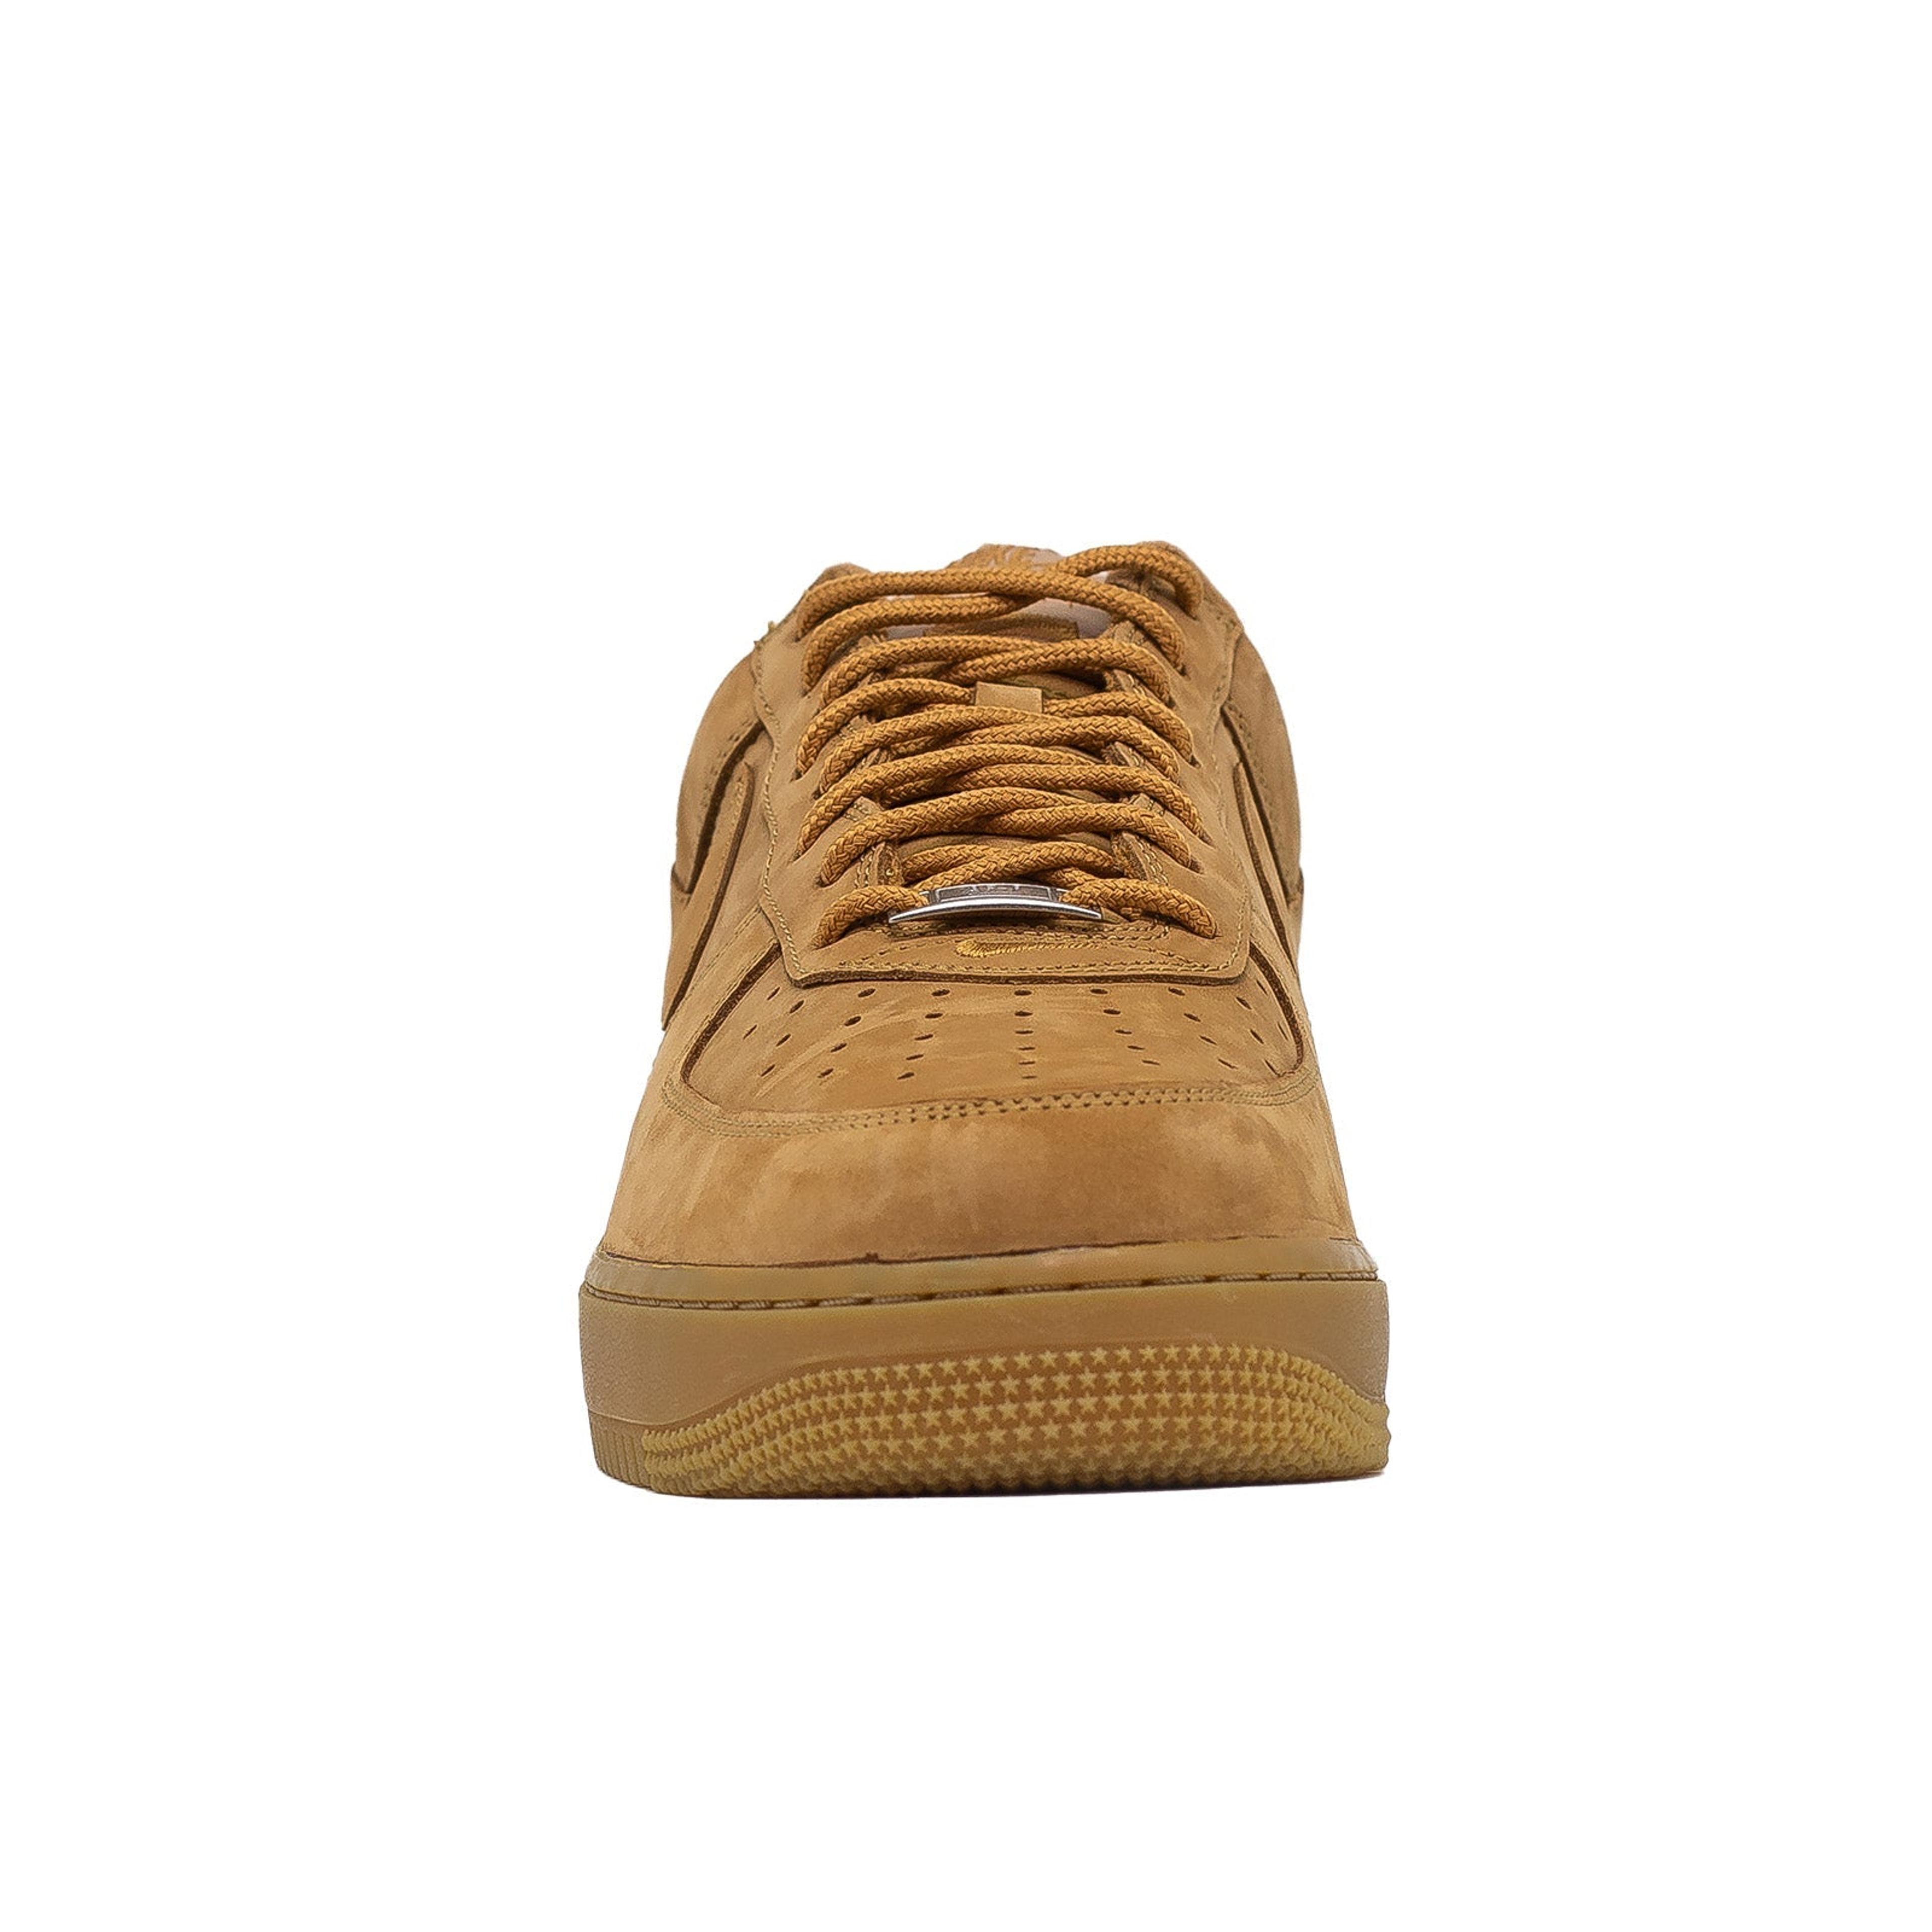 Alternate View 2 of Nike Air Force 1 Low, Supreme Wheat